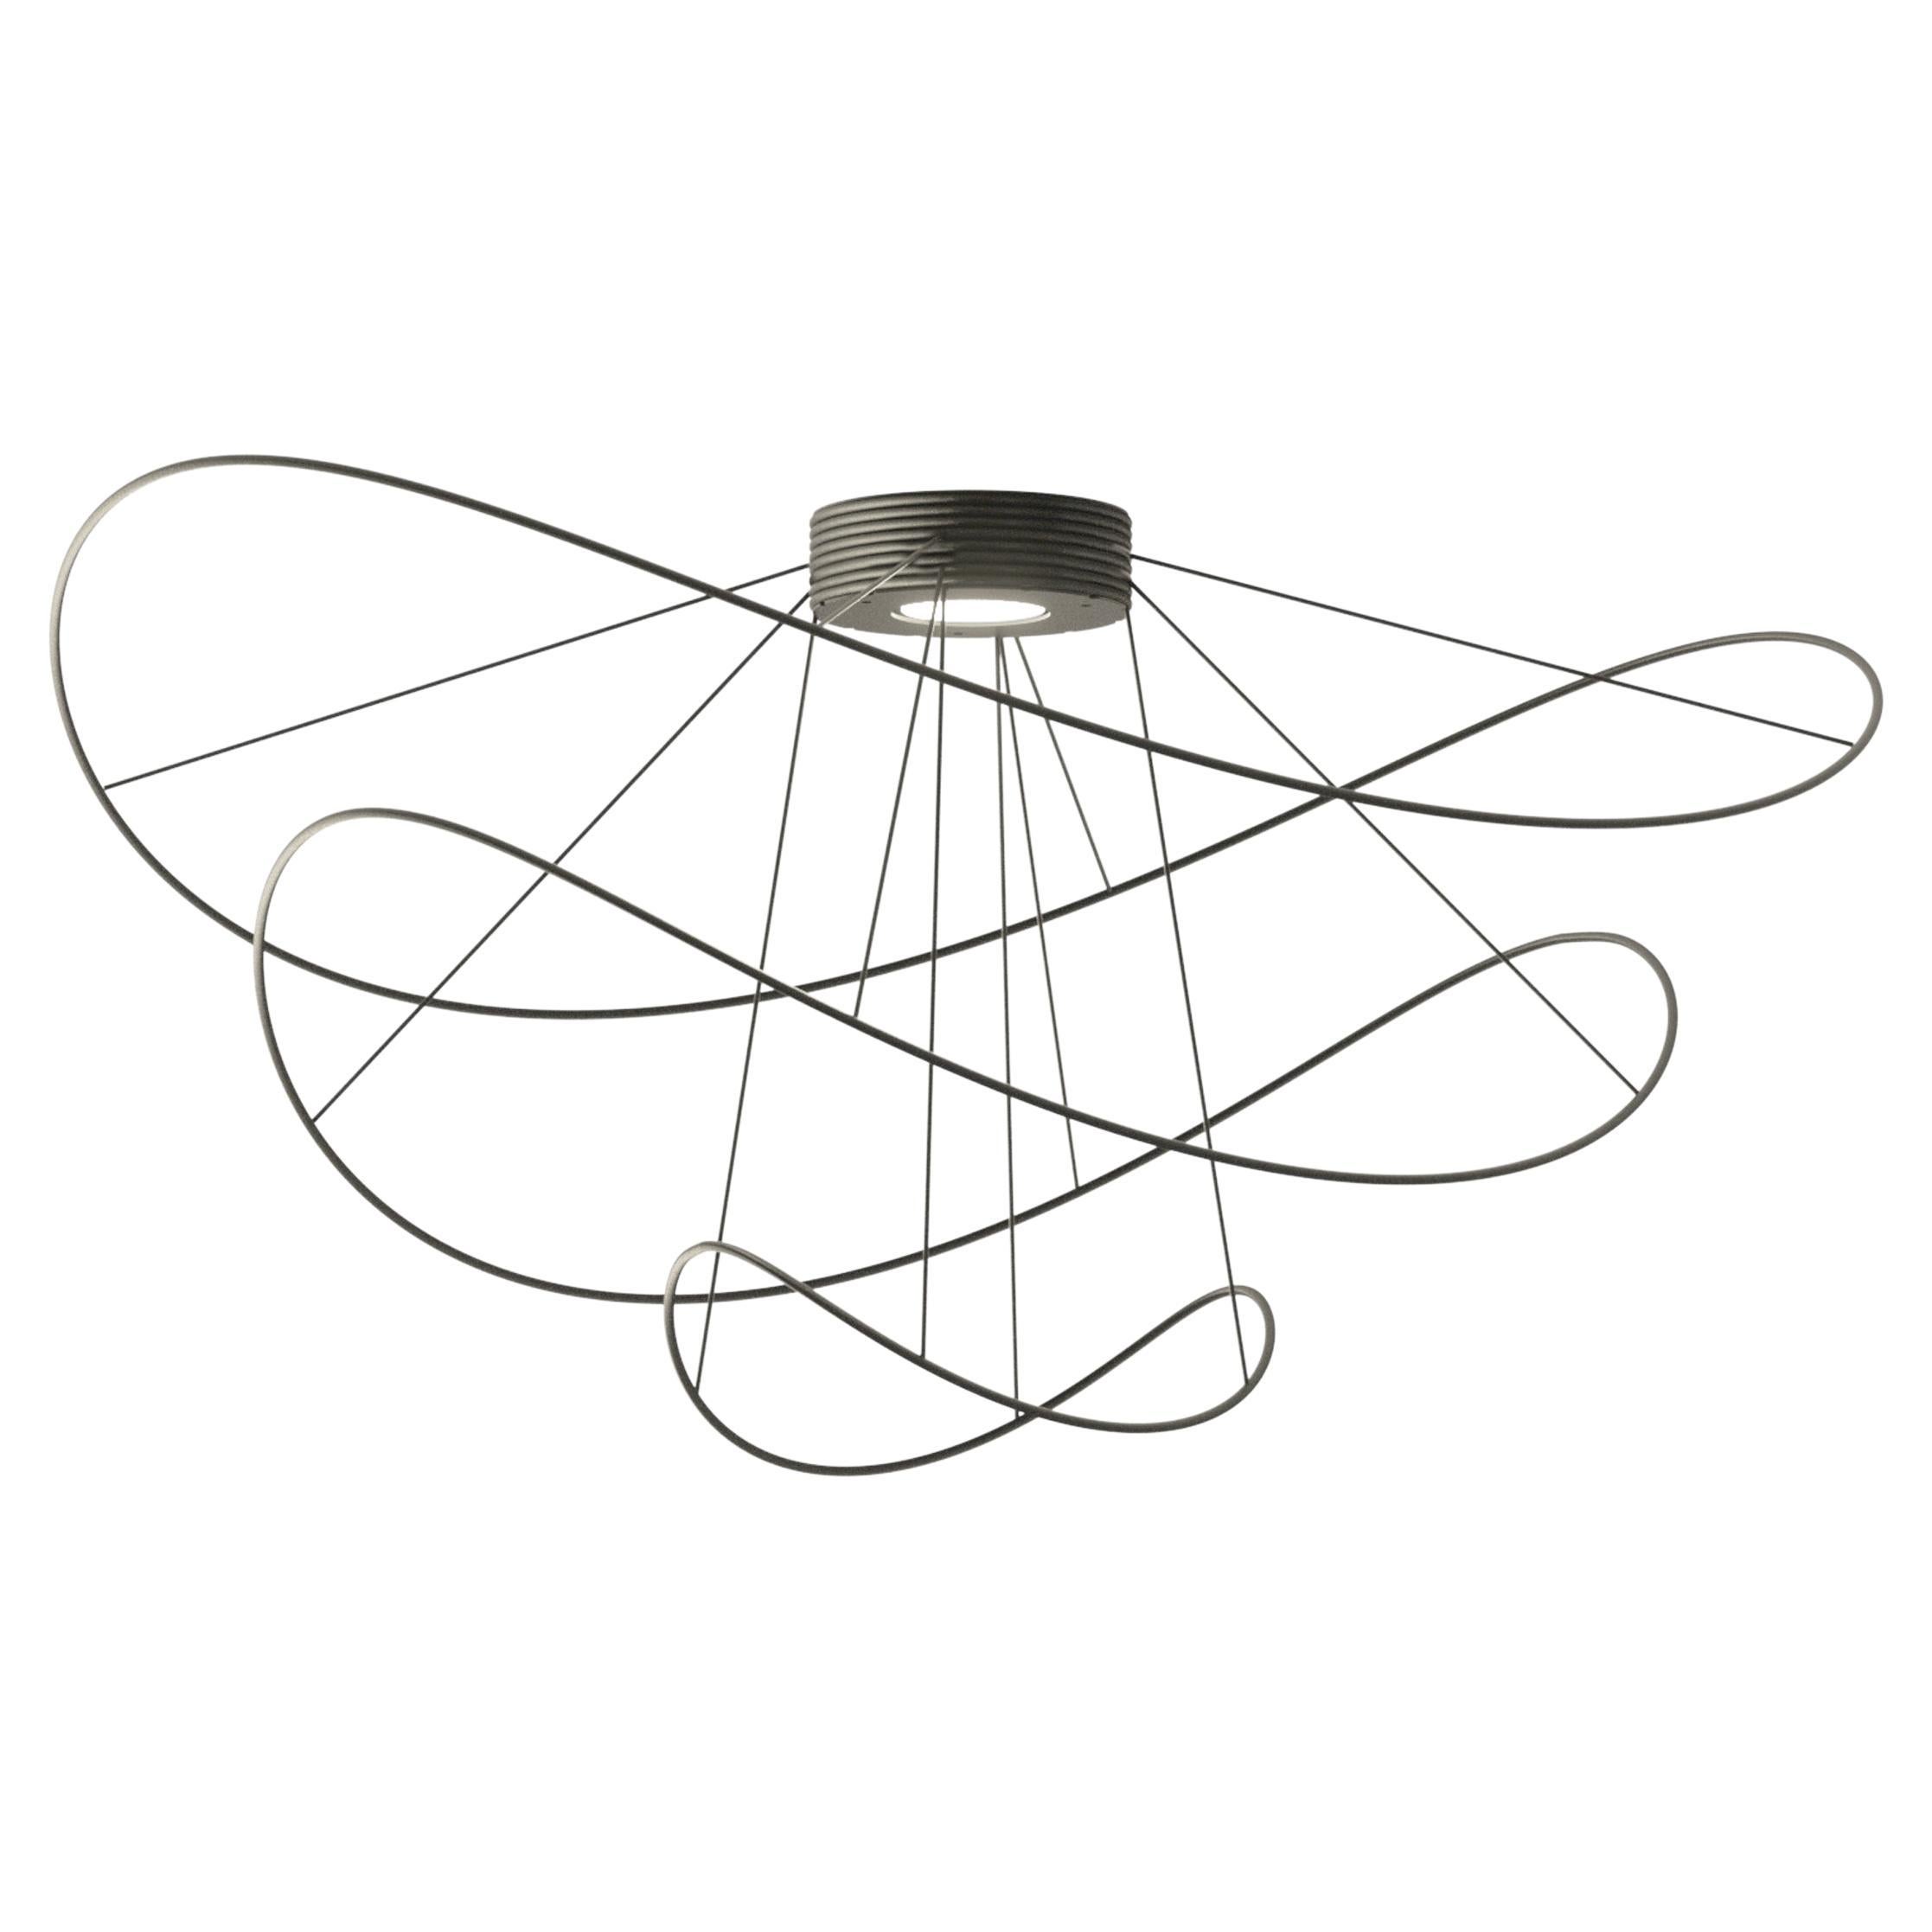 Axolight Hoops 3 Medium Flush Mount Ceiling Lamp in Black by Giovanni Barbato For Sale